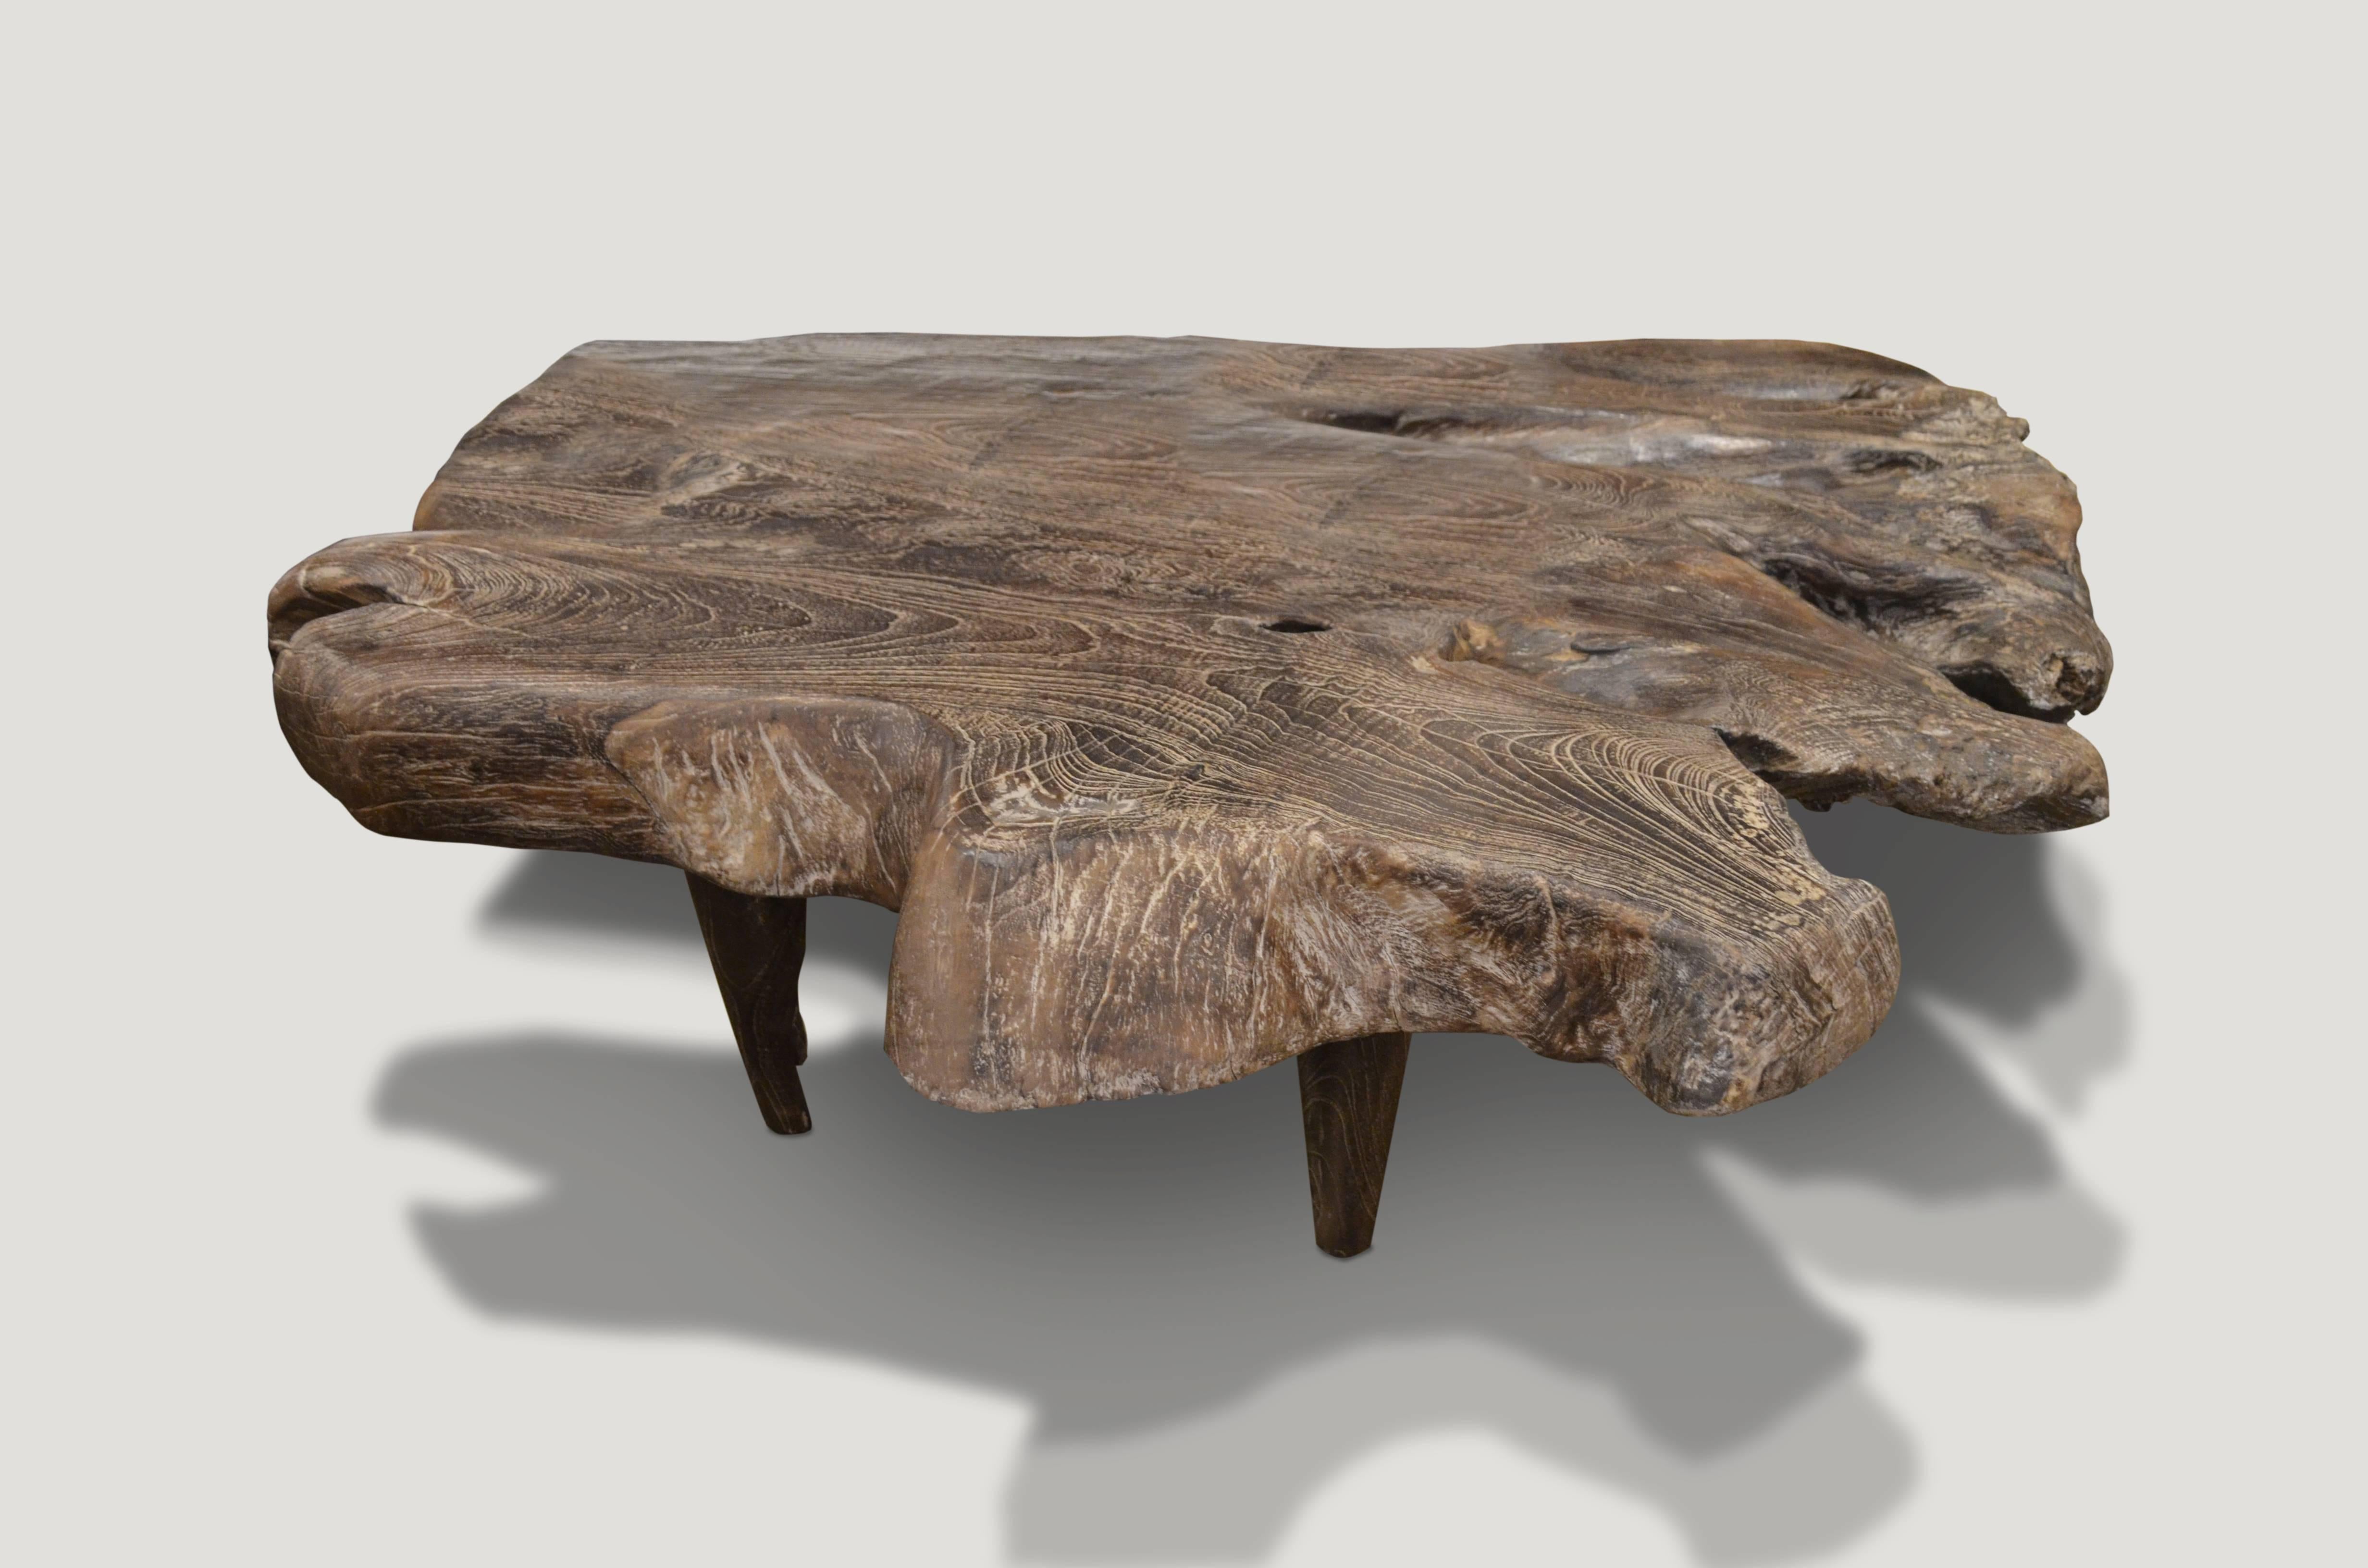 Solid reclaimed teak burnt one time, then sanded and sealed with a cerused finish. Unlike the Triple Burnt Collection which is charred to an espresso finish, this coffee table has been burnt one time to produce a chocolate brown. This impressive